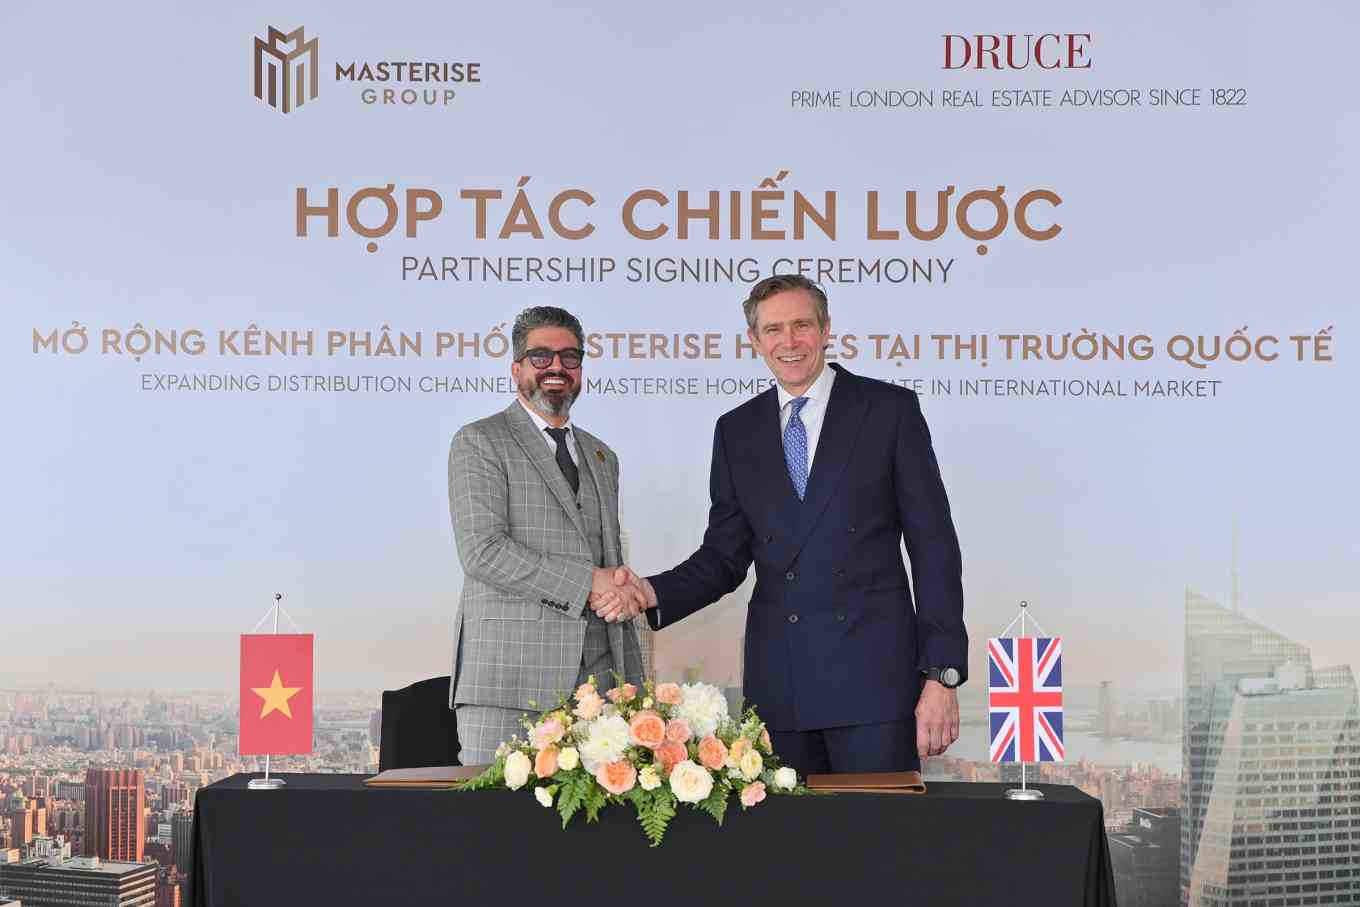 Cooperating with Druce (UK), Masterise Group expands Vietnamese real estate distribution to the world-compressed